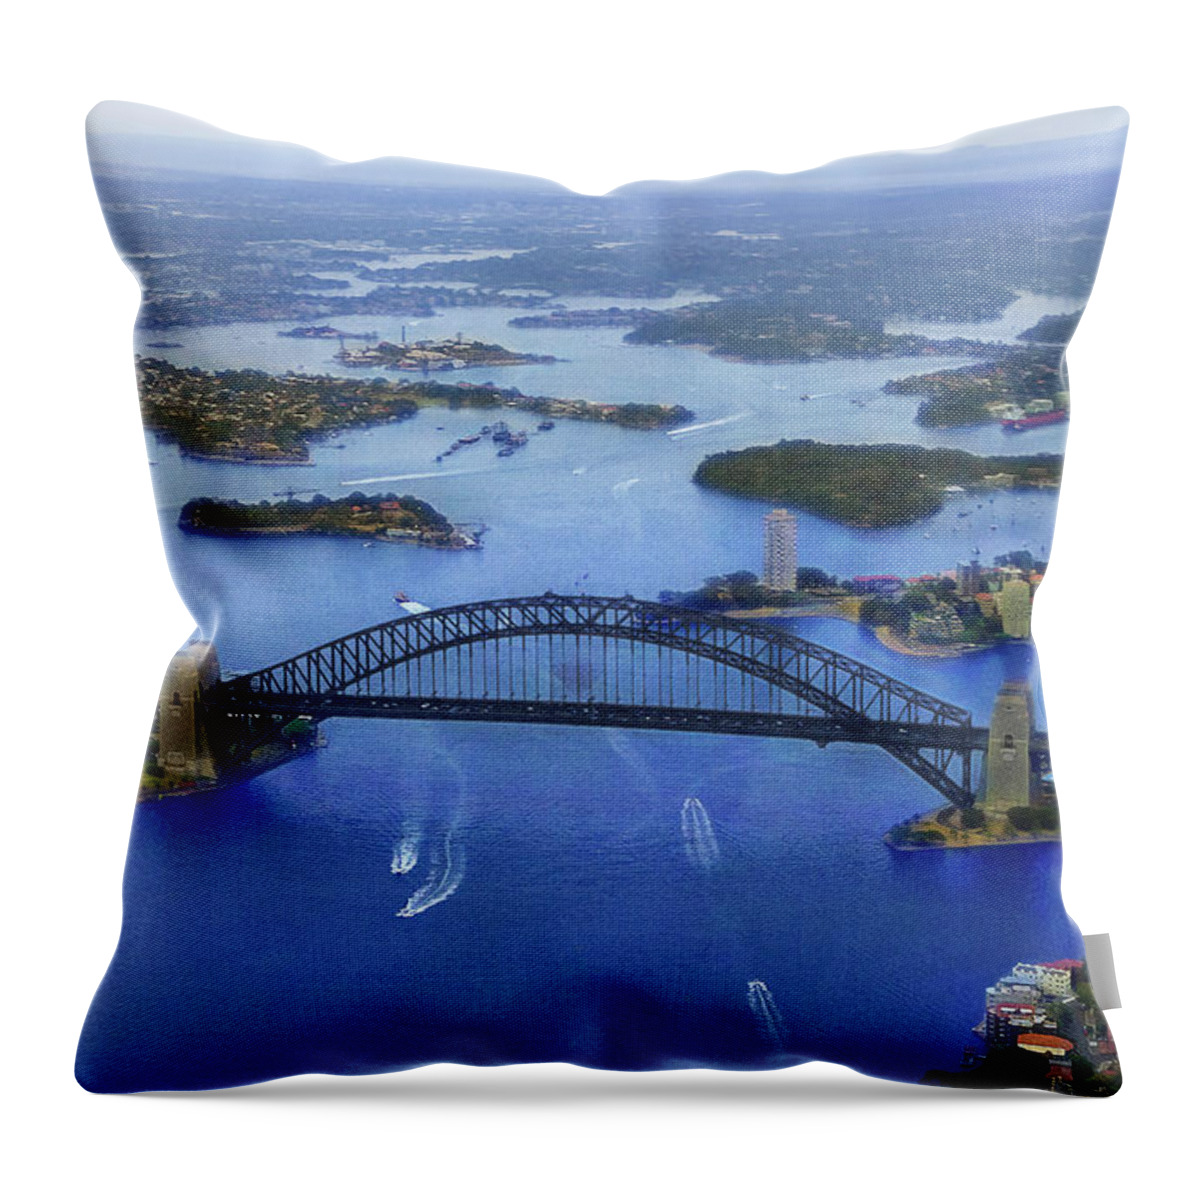 Sydney Throw Pillow featuring the photograph Harbour Bridge From Helicopter Flight by Miroslava Jurcik